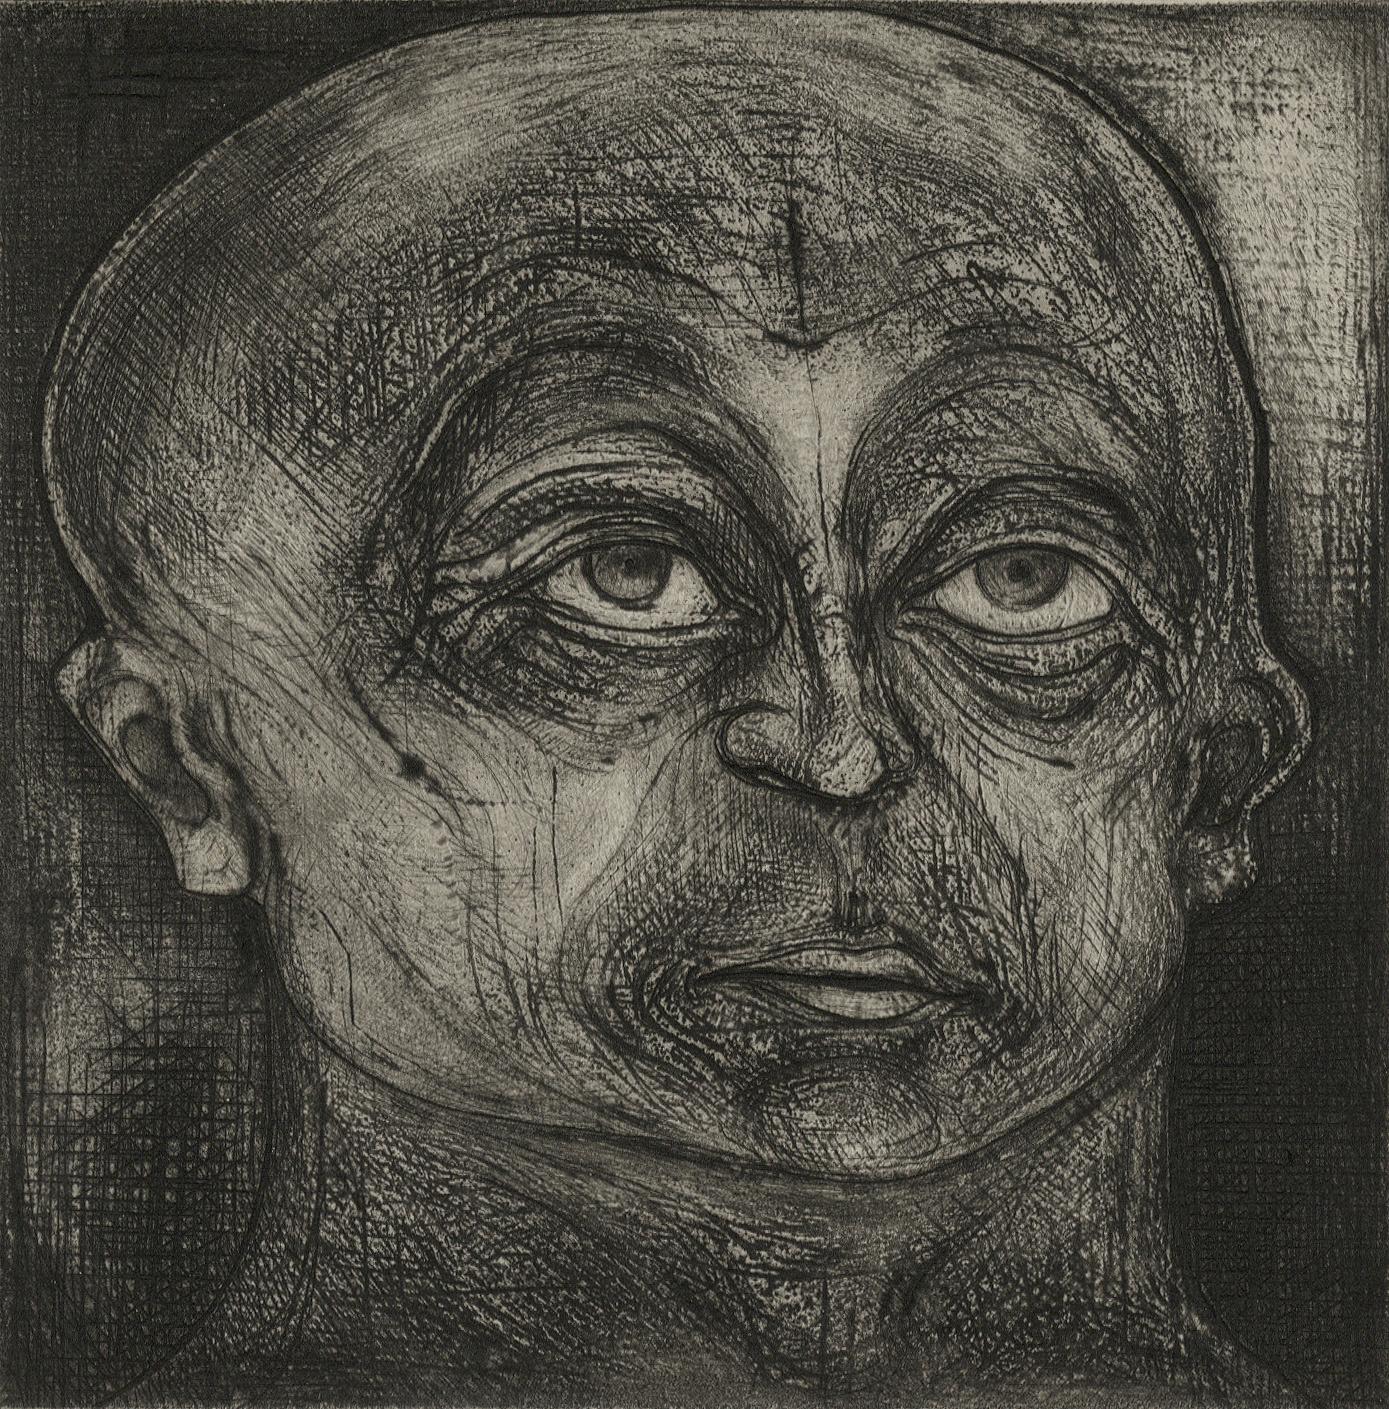 Seyed M. S. Edalatpour Figurative Print - One of Twelve X (etchings of one of 12 heads based on  monumental sculpture)